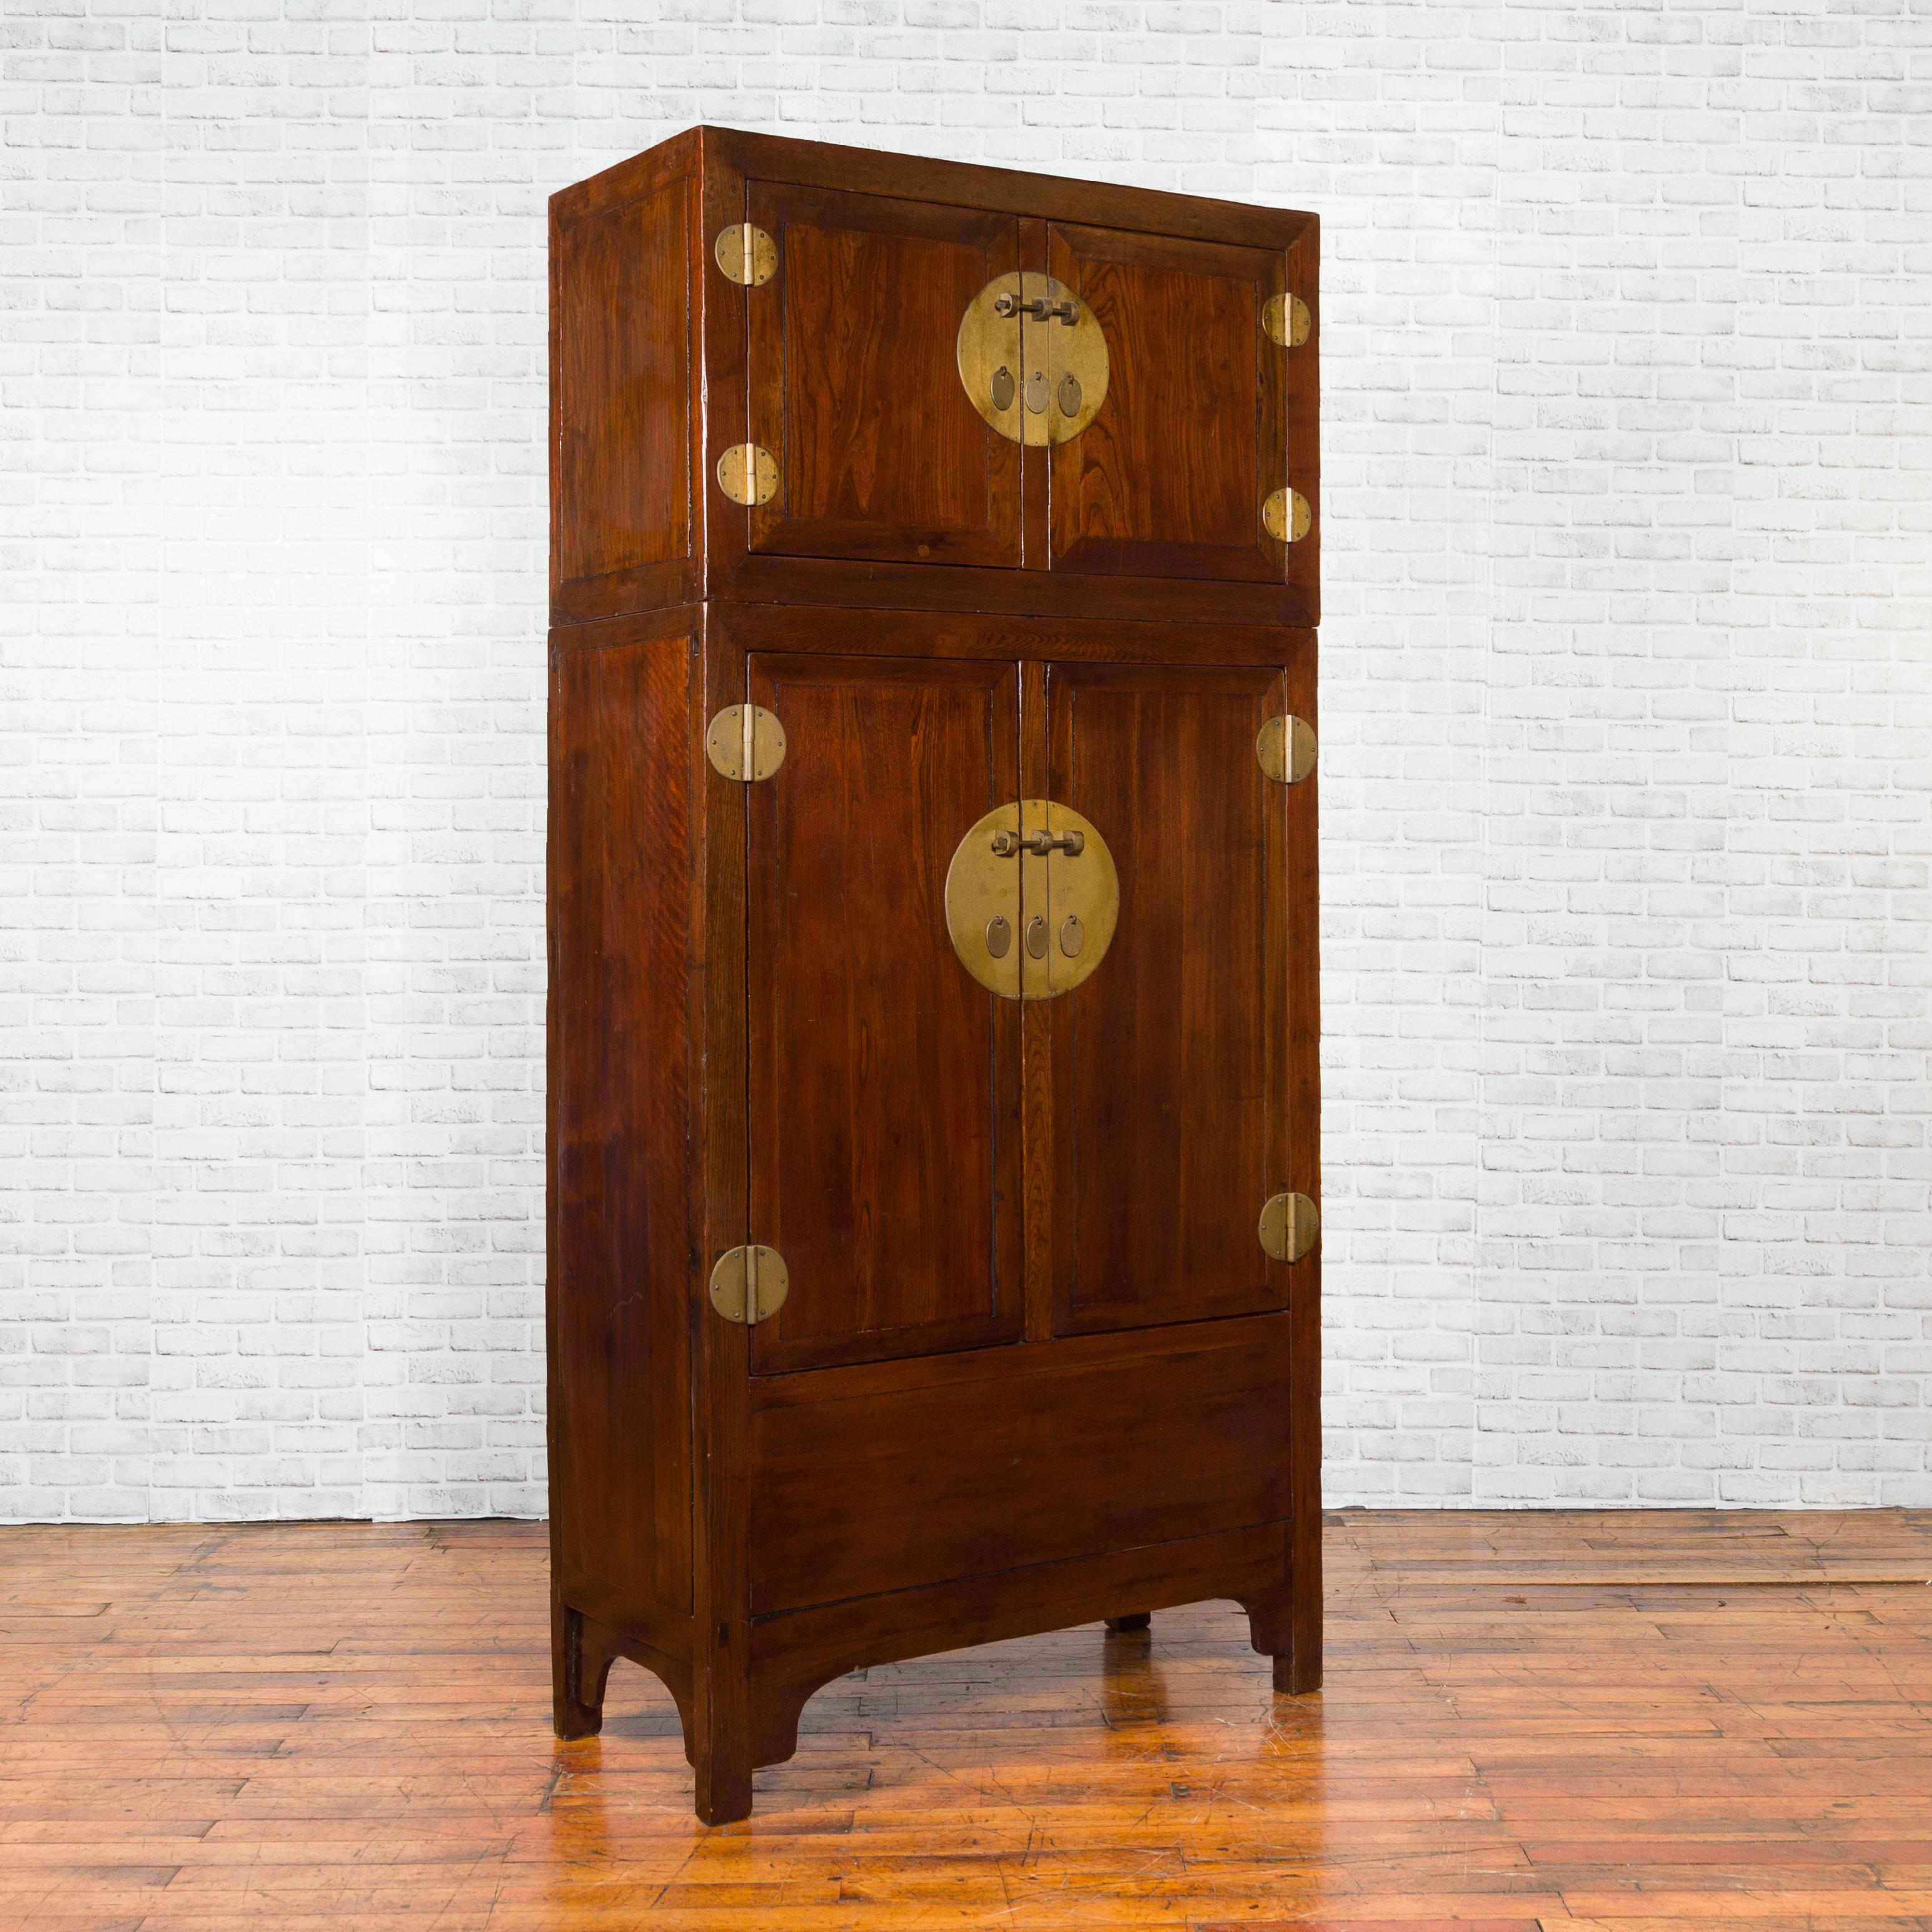 A Chinese Qing Dynasty period elm and burl wood compound multiseason cabinet from the 19th century, with four doors, inner shelves and hidden drawers. Created in China during the 19th century, this tall two-section compound cabinet features a linear